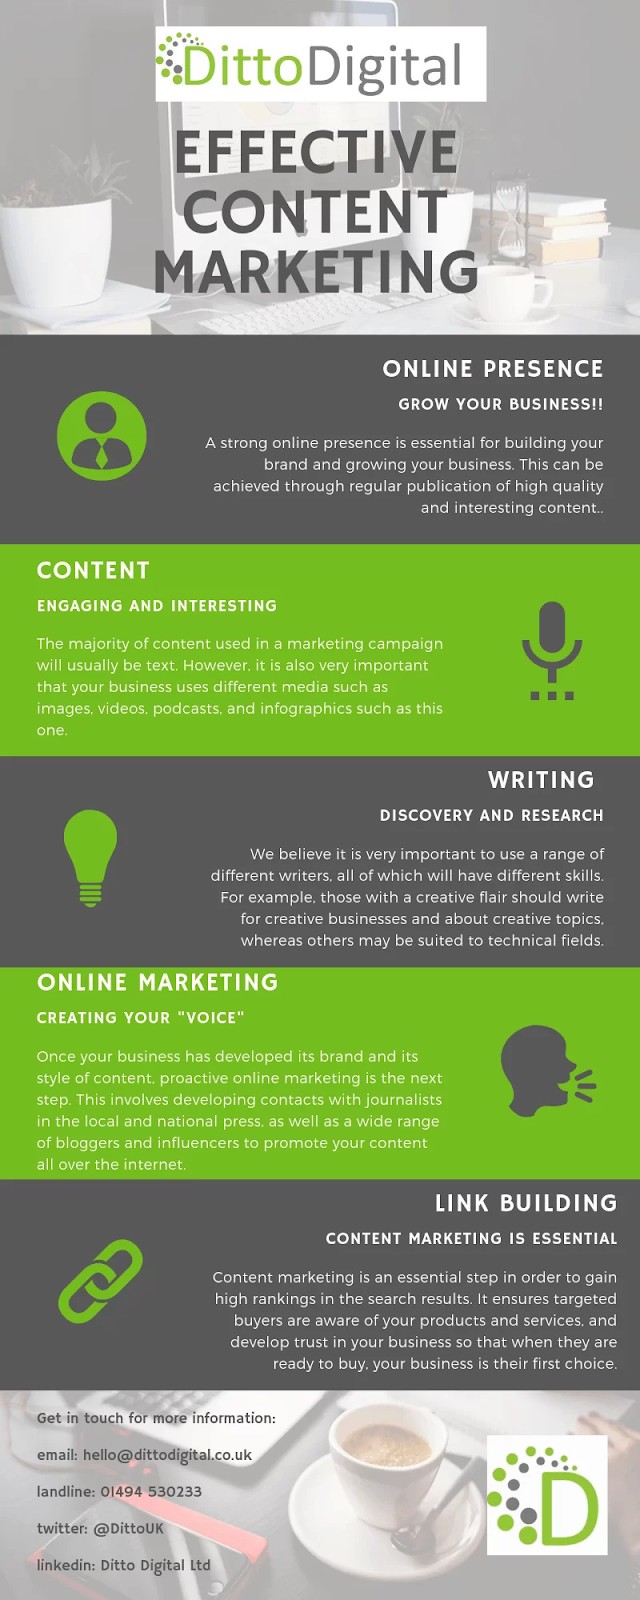 Infographic on effective content marketing.